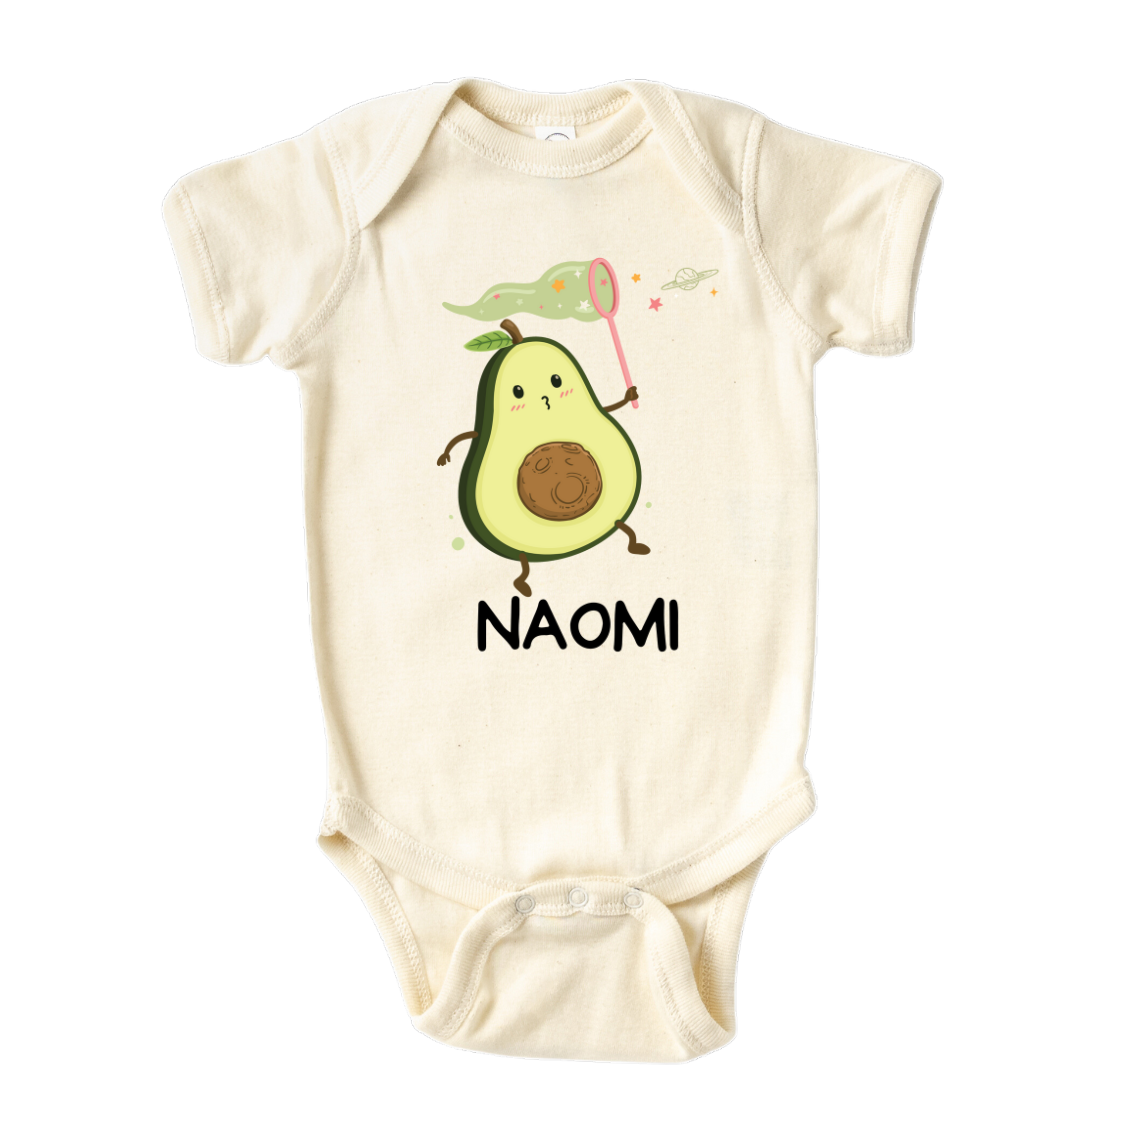 Baby Onesie, Cute Baby Gift for Newborn Clothes for Baby Bodysuit with a cute avocado catching stars design, customizable with names.